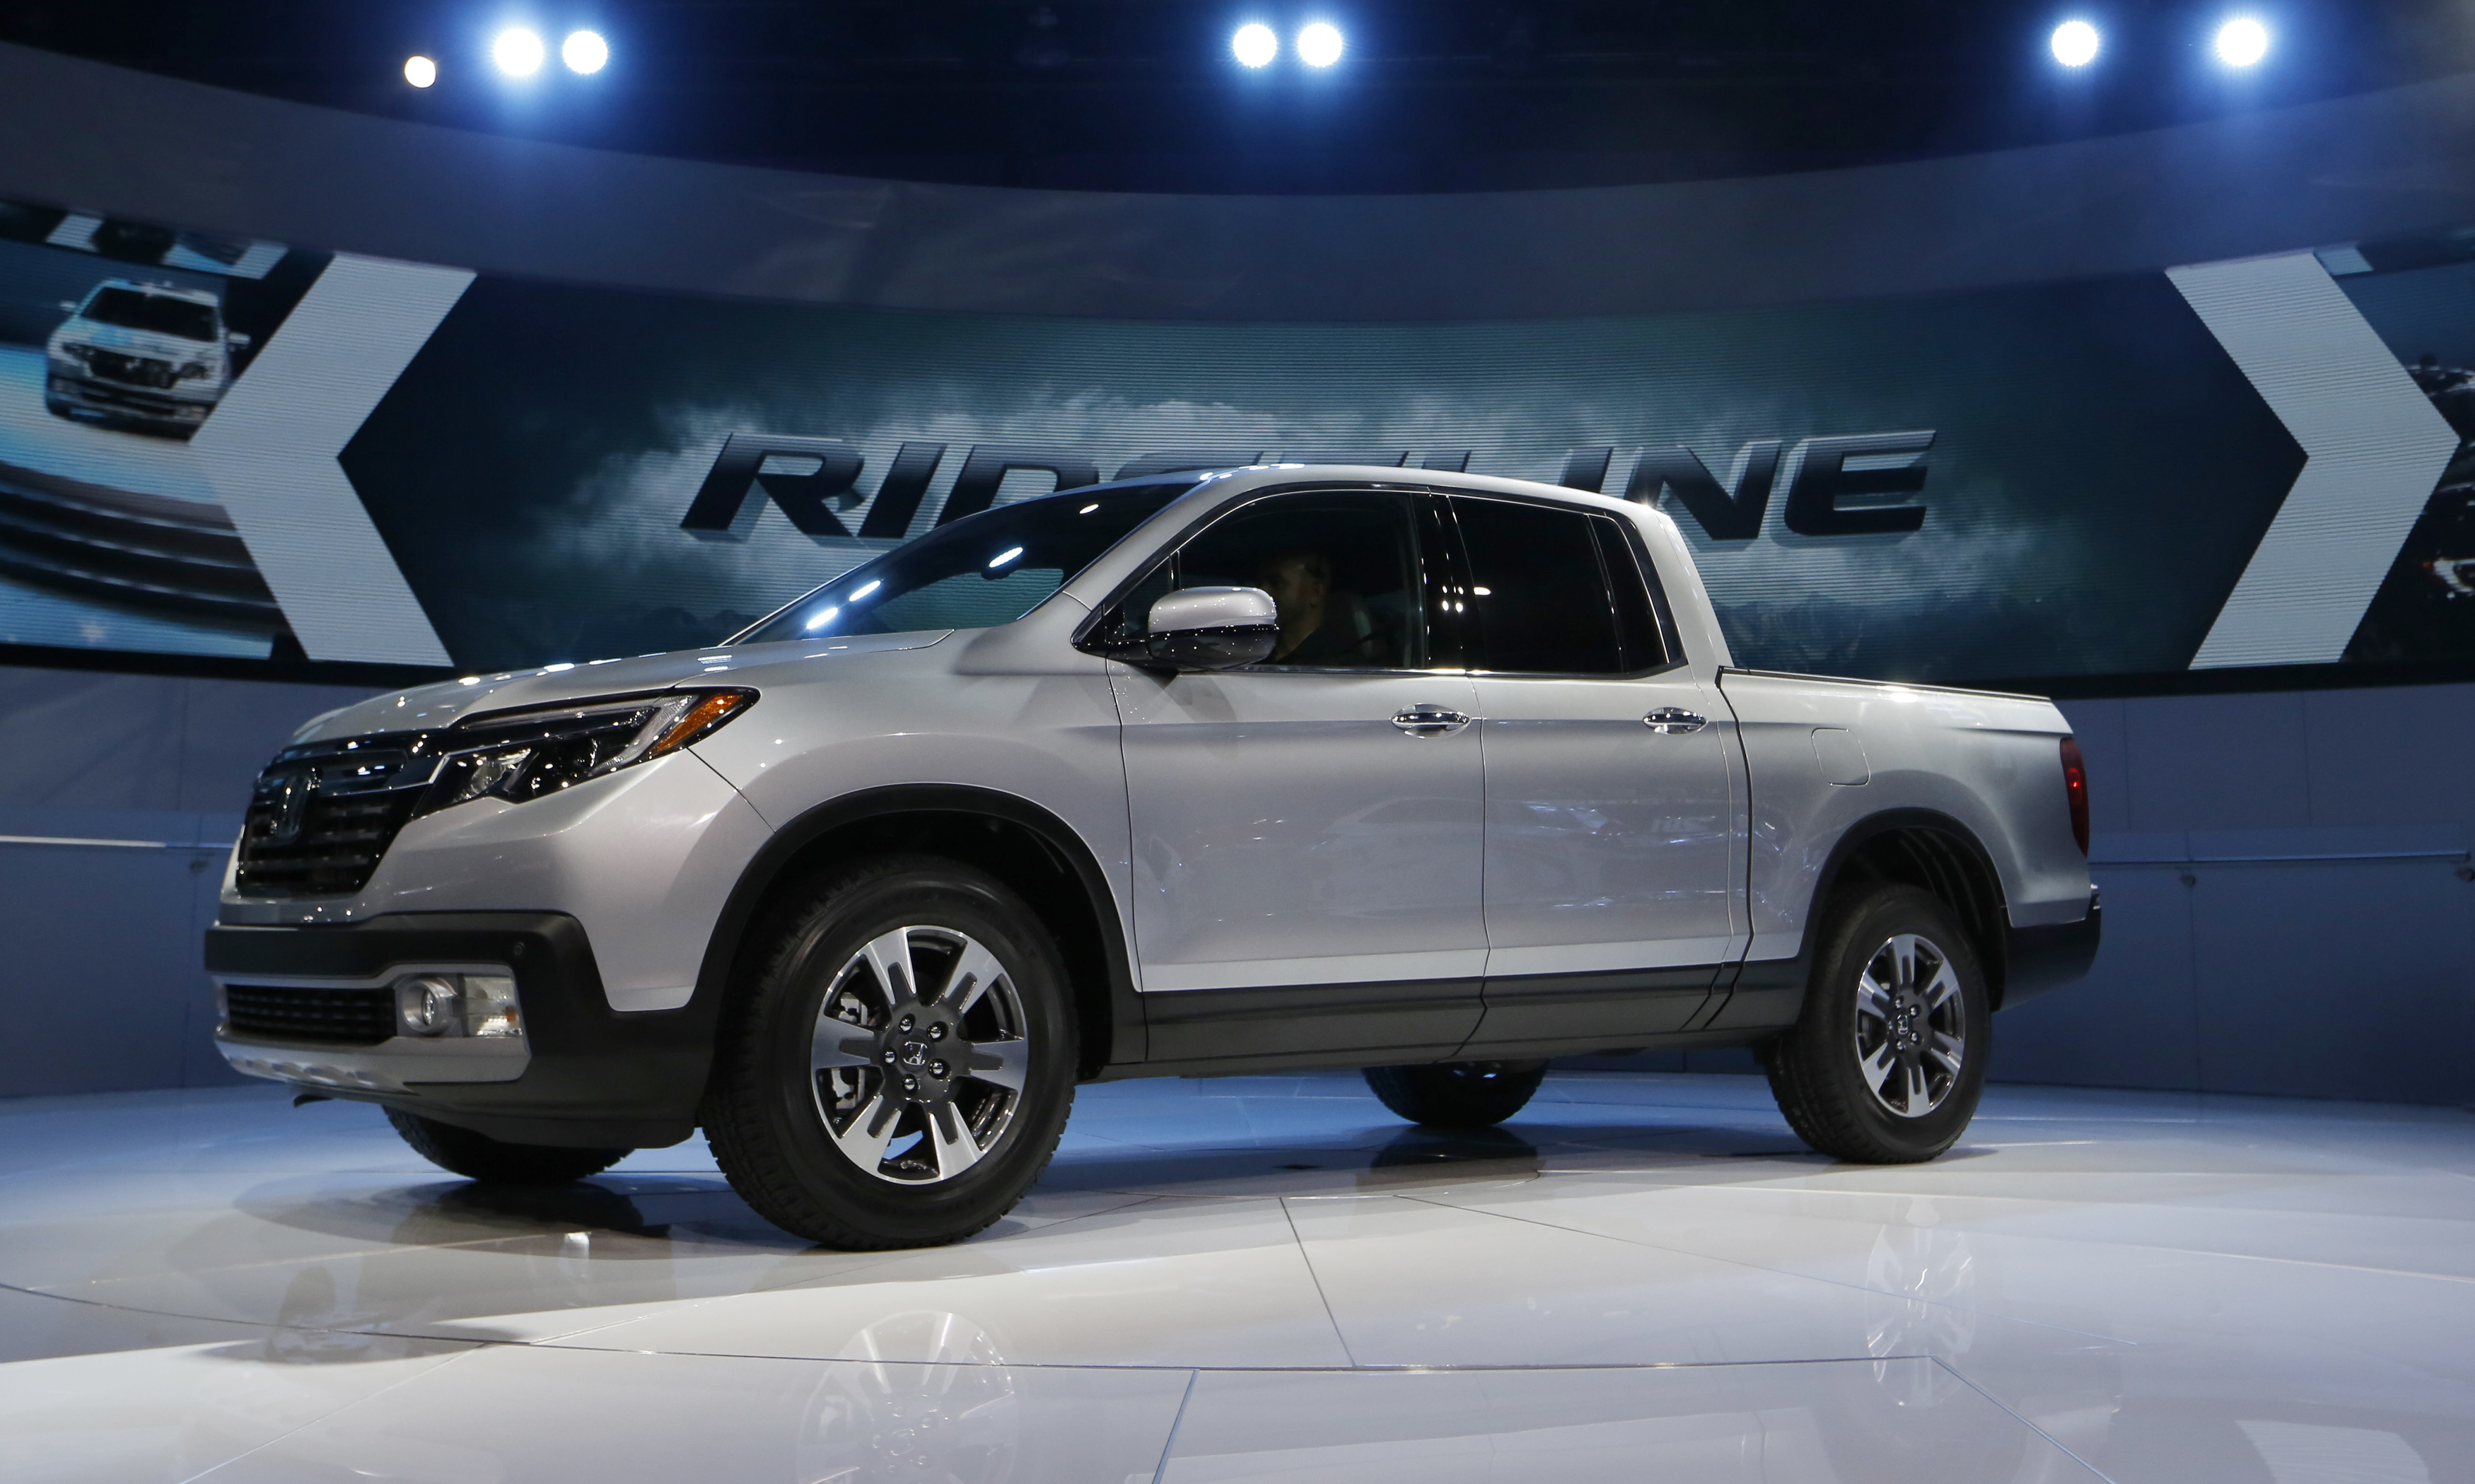 The 2017 Honda Ridgeline is unveiled at the North American International Auto Show in Detroit